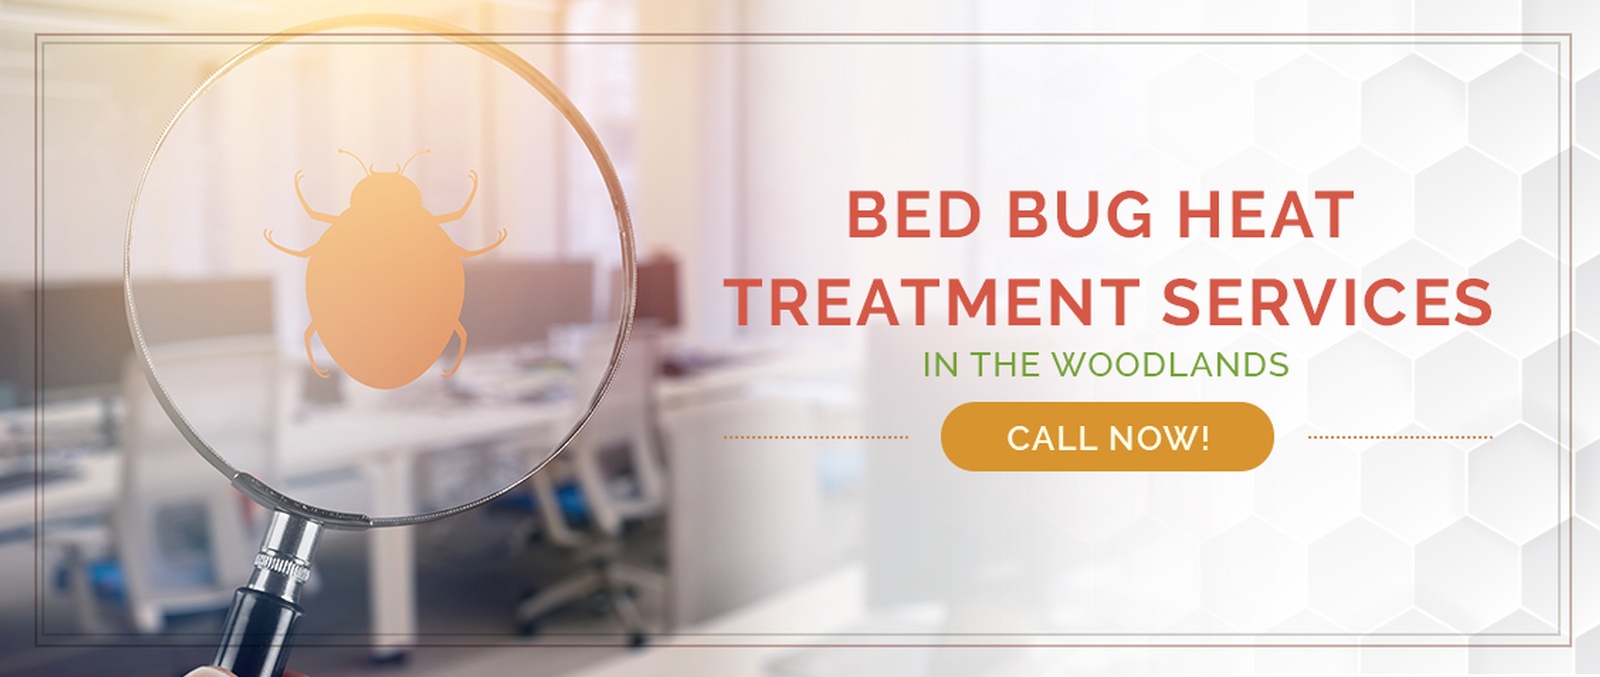 The Woodlands Bed Bug Treatment / Heater Rental Services by Houston Bed Bug Heaters